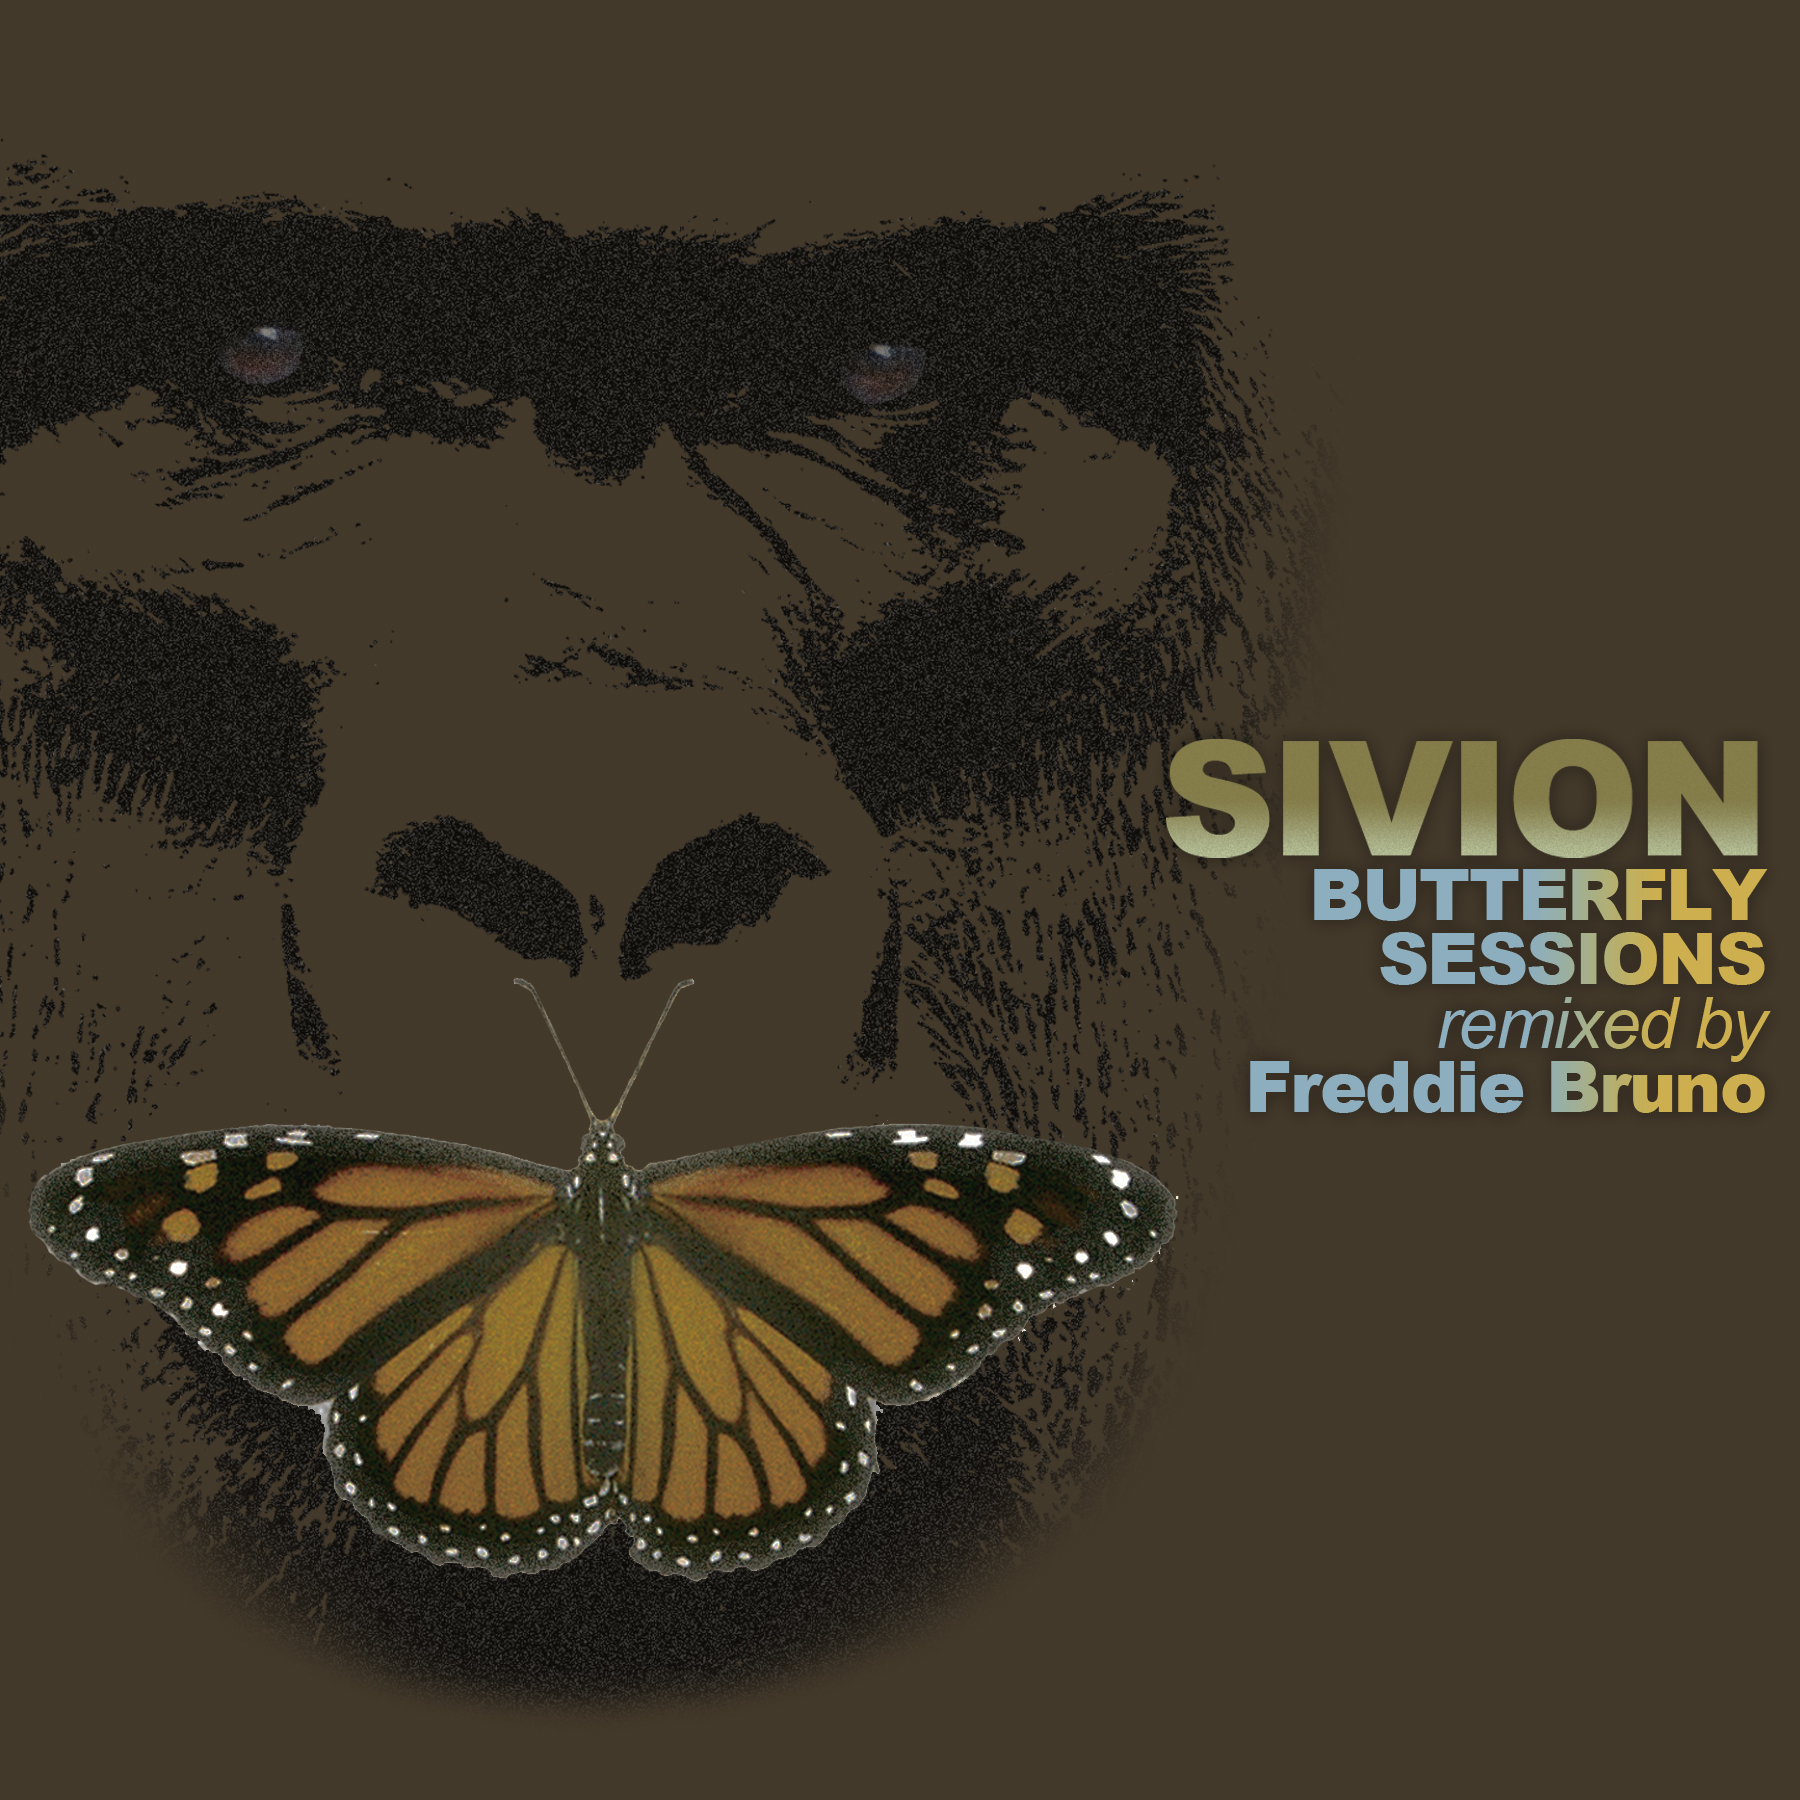 Sivion x Freddie Bruno "Butterfly Sessions: Remixed by ...